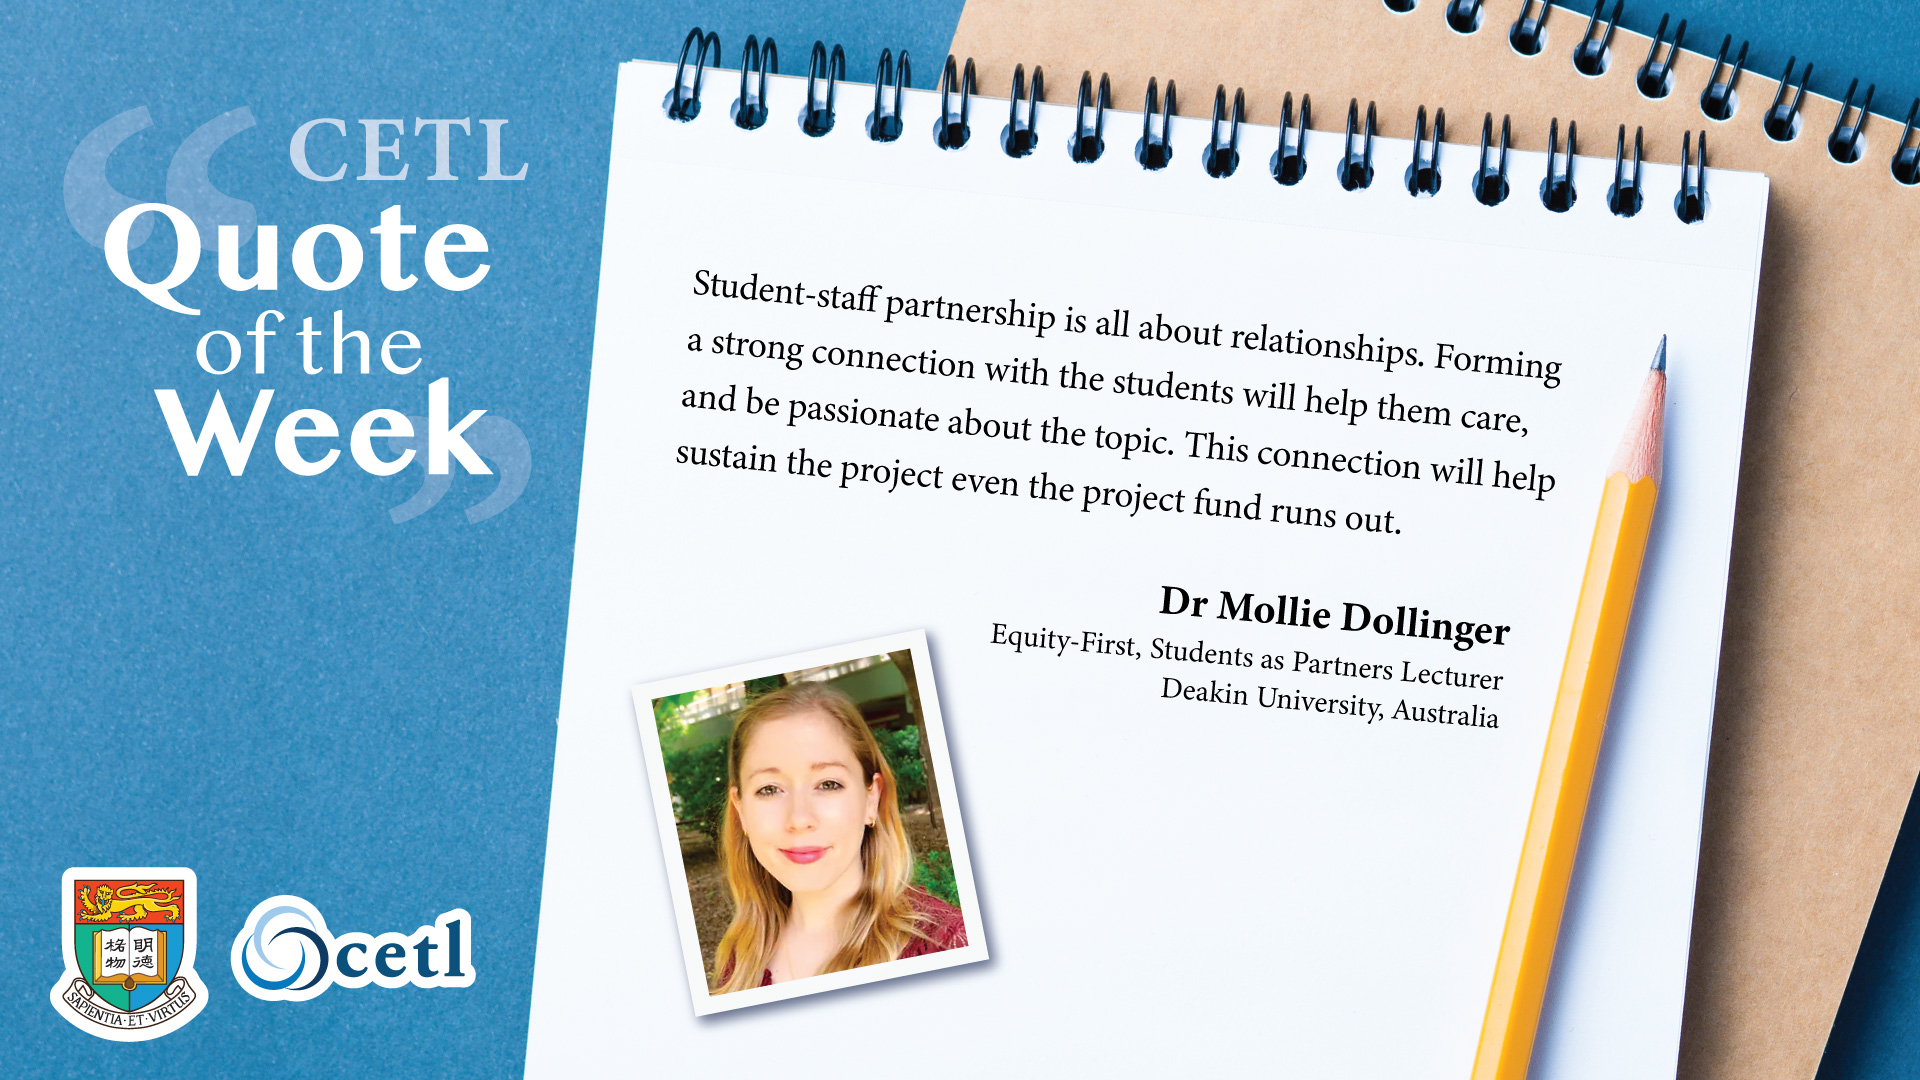 Dr. Mollie Dollinger - Student-staff partnership is all about relationships. Forming a strong connection with the students will help them care, and be passionate about the topic. This connection will help sustain the project even the project fund runs out.